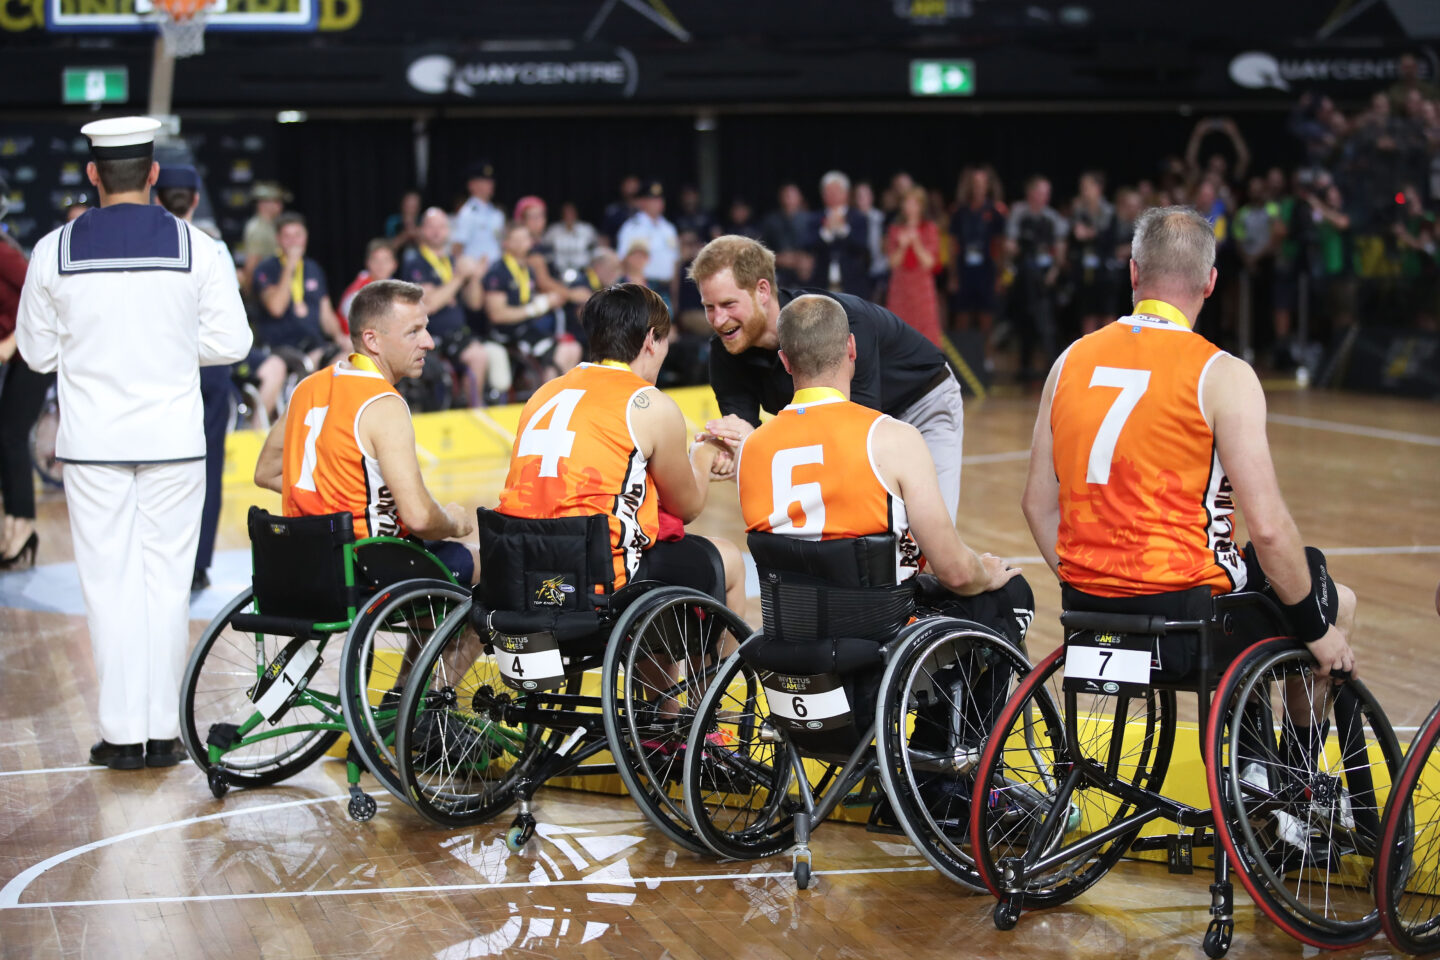 Prince Harry, Duke of Sussex congratulates the silver medallists the Netherlands after the Wheelchair Basketball gold medal match during day eight of the Invictus Games Sydney 2018 at on October 27, 2018 in Sydney, Australia.